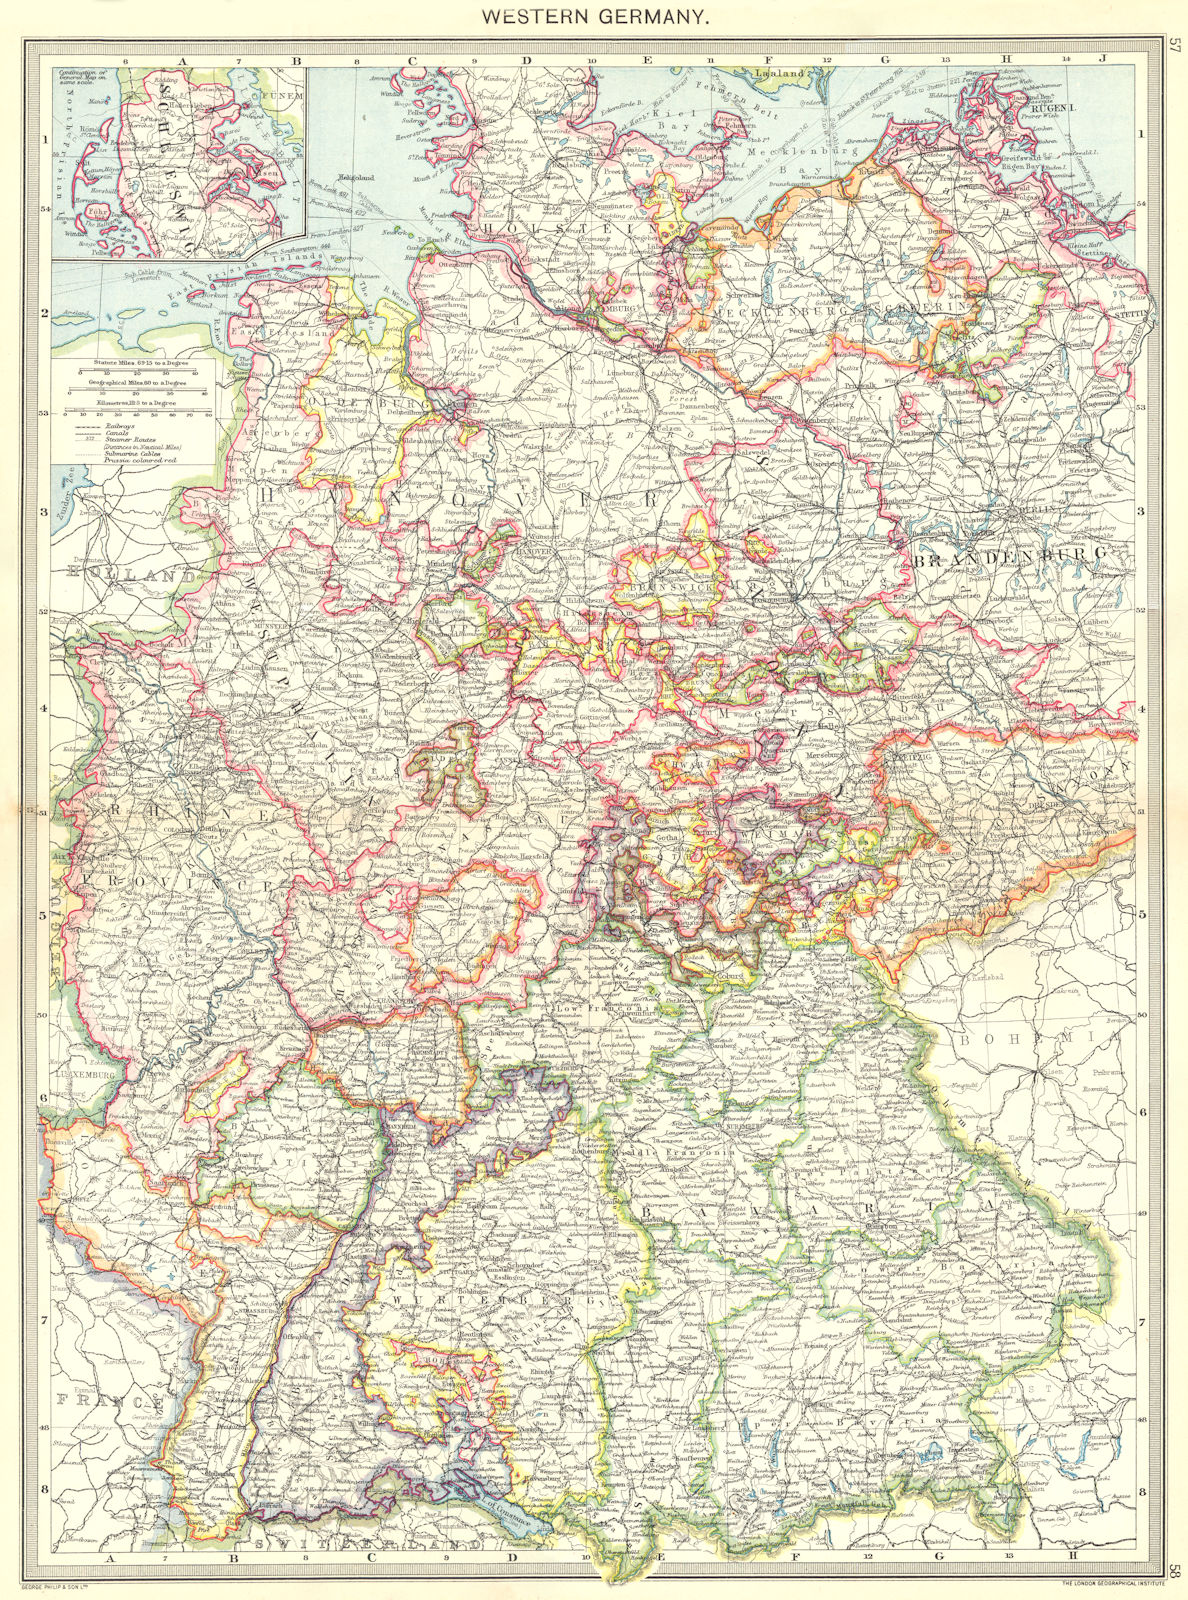 Associate Product GERMANY. Western Germany; Inset map of Schleswig 1907 old antique chart